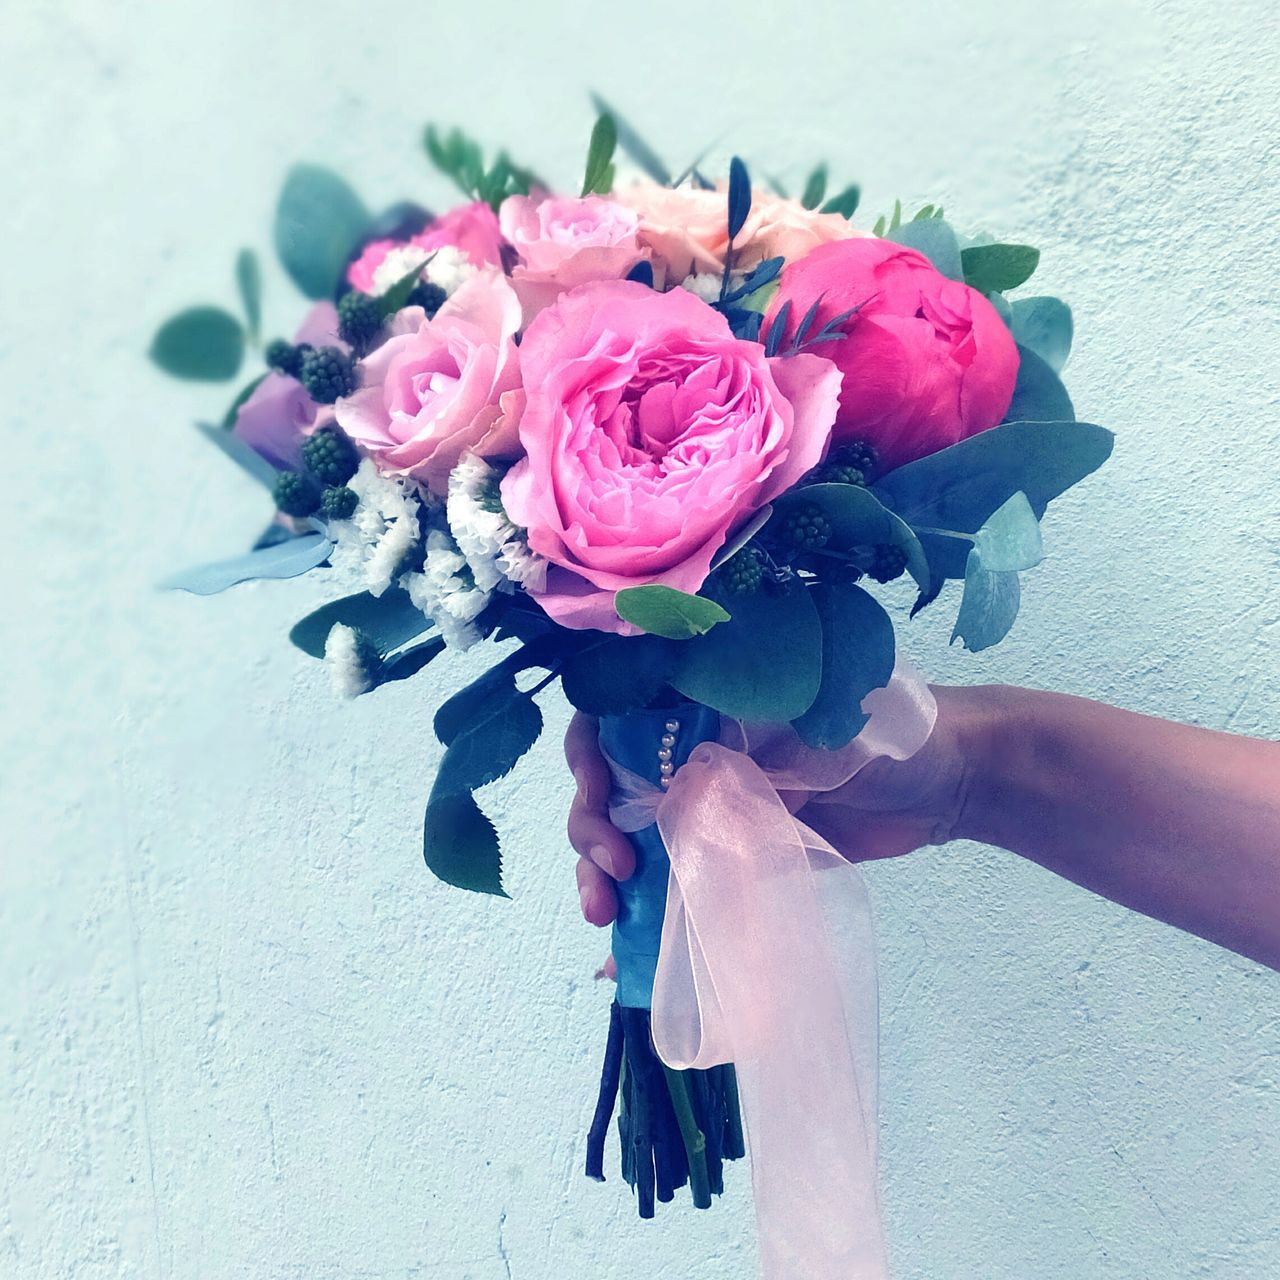 flower, freshness, fragility, holding, petal, bouquet, flower head, beauty in nature, person, rose - flower, indoors, part of, vase, close-up, bunch of flowers, botany, flower arrangement, nature, softness, personal perspective, springtime, rose, blossom, pink color, human finger, beauty, in bloom